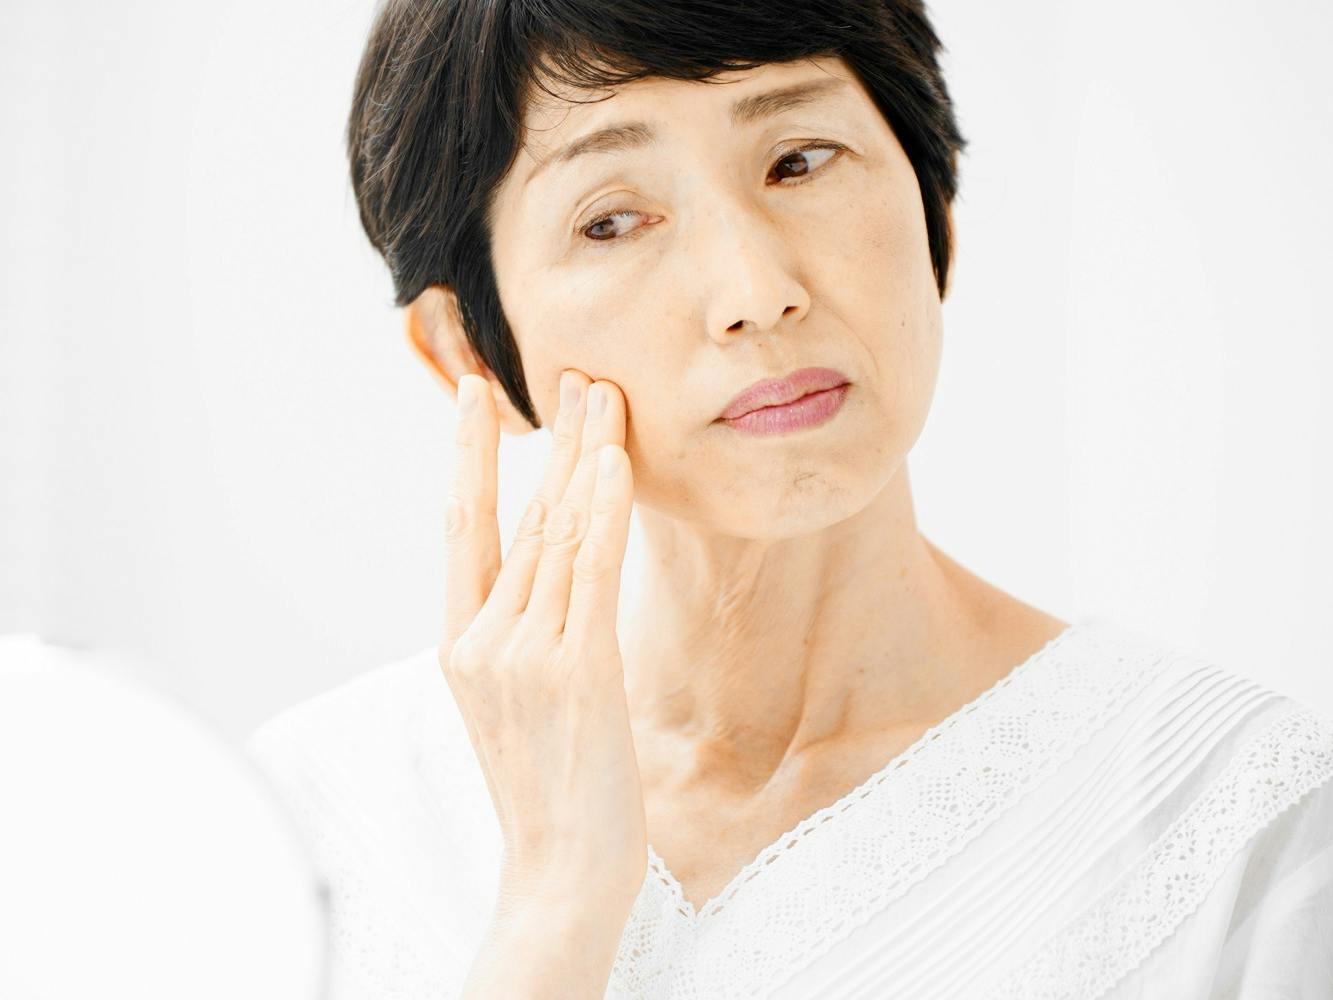 An older woman touches her face while looking at her reflection in a hand mirror